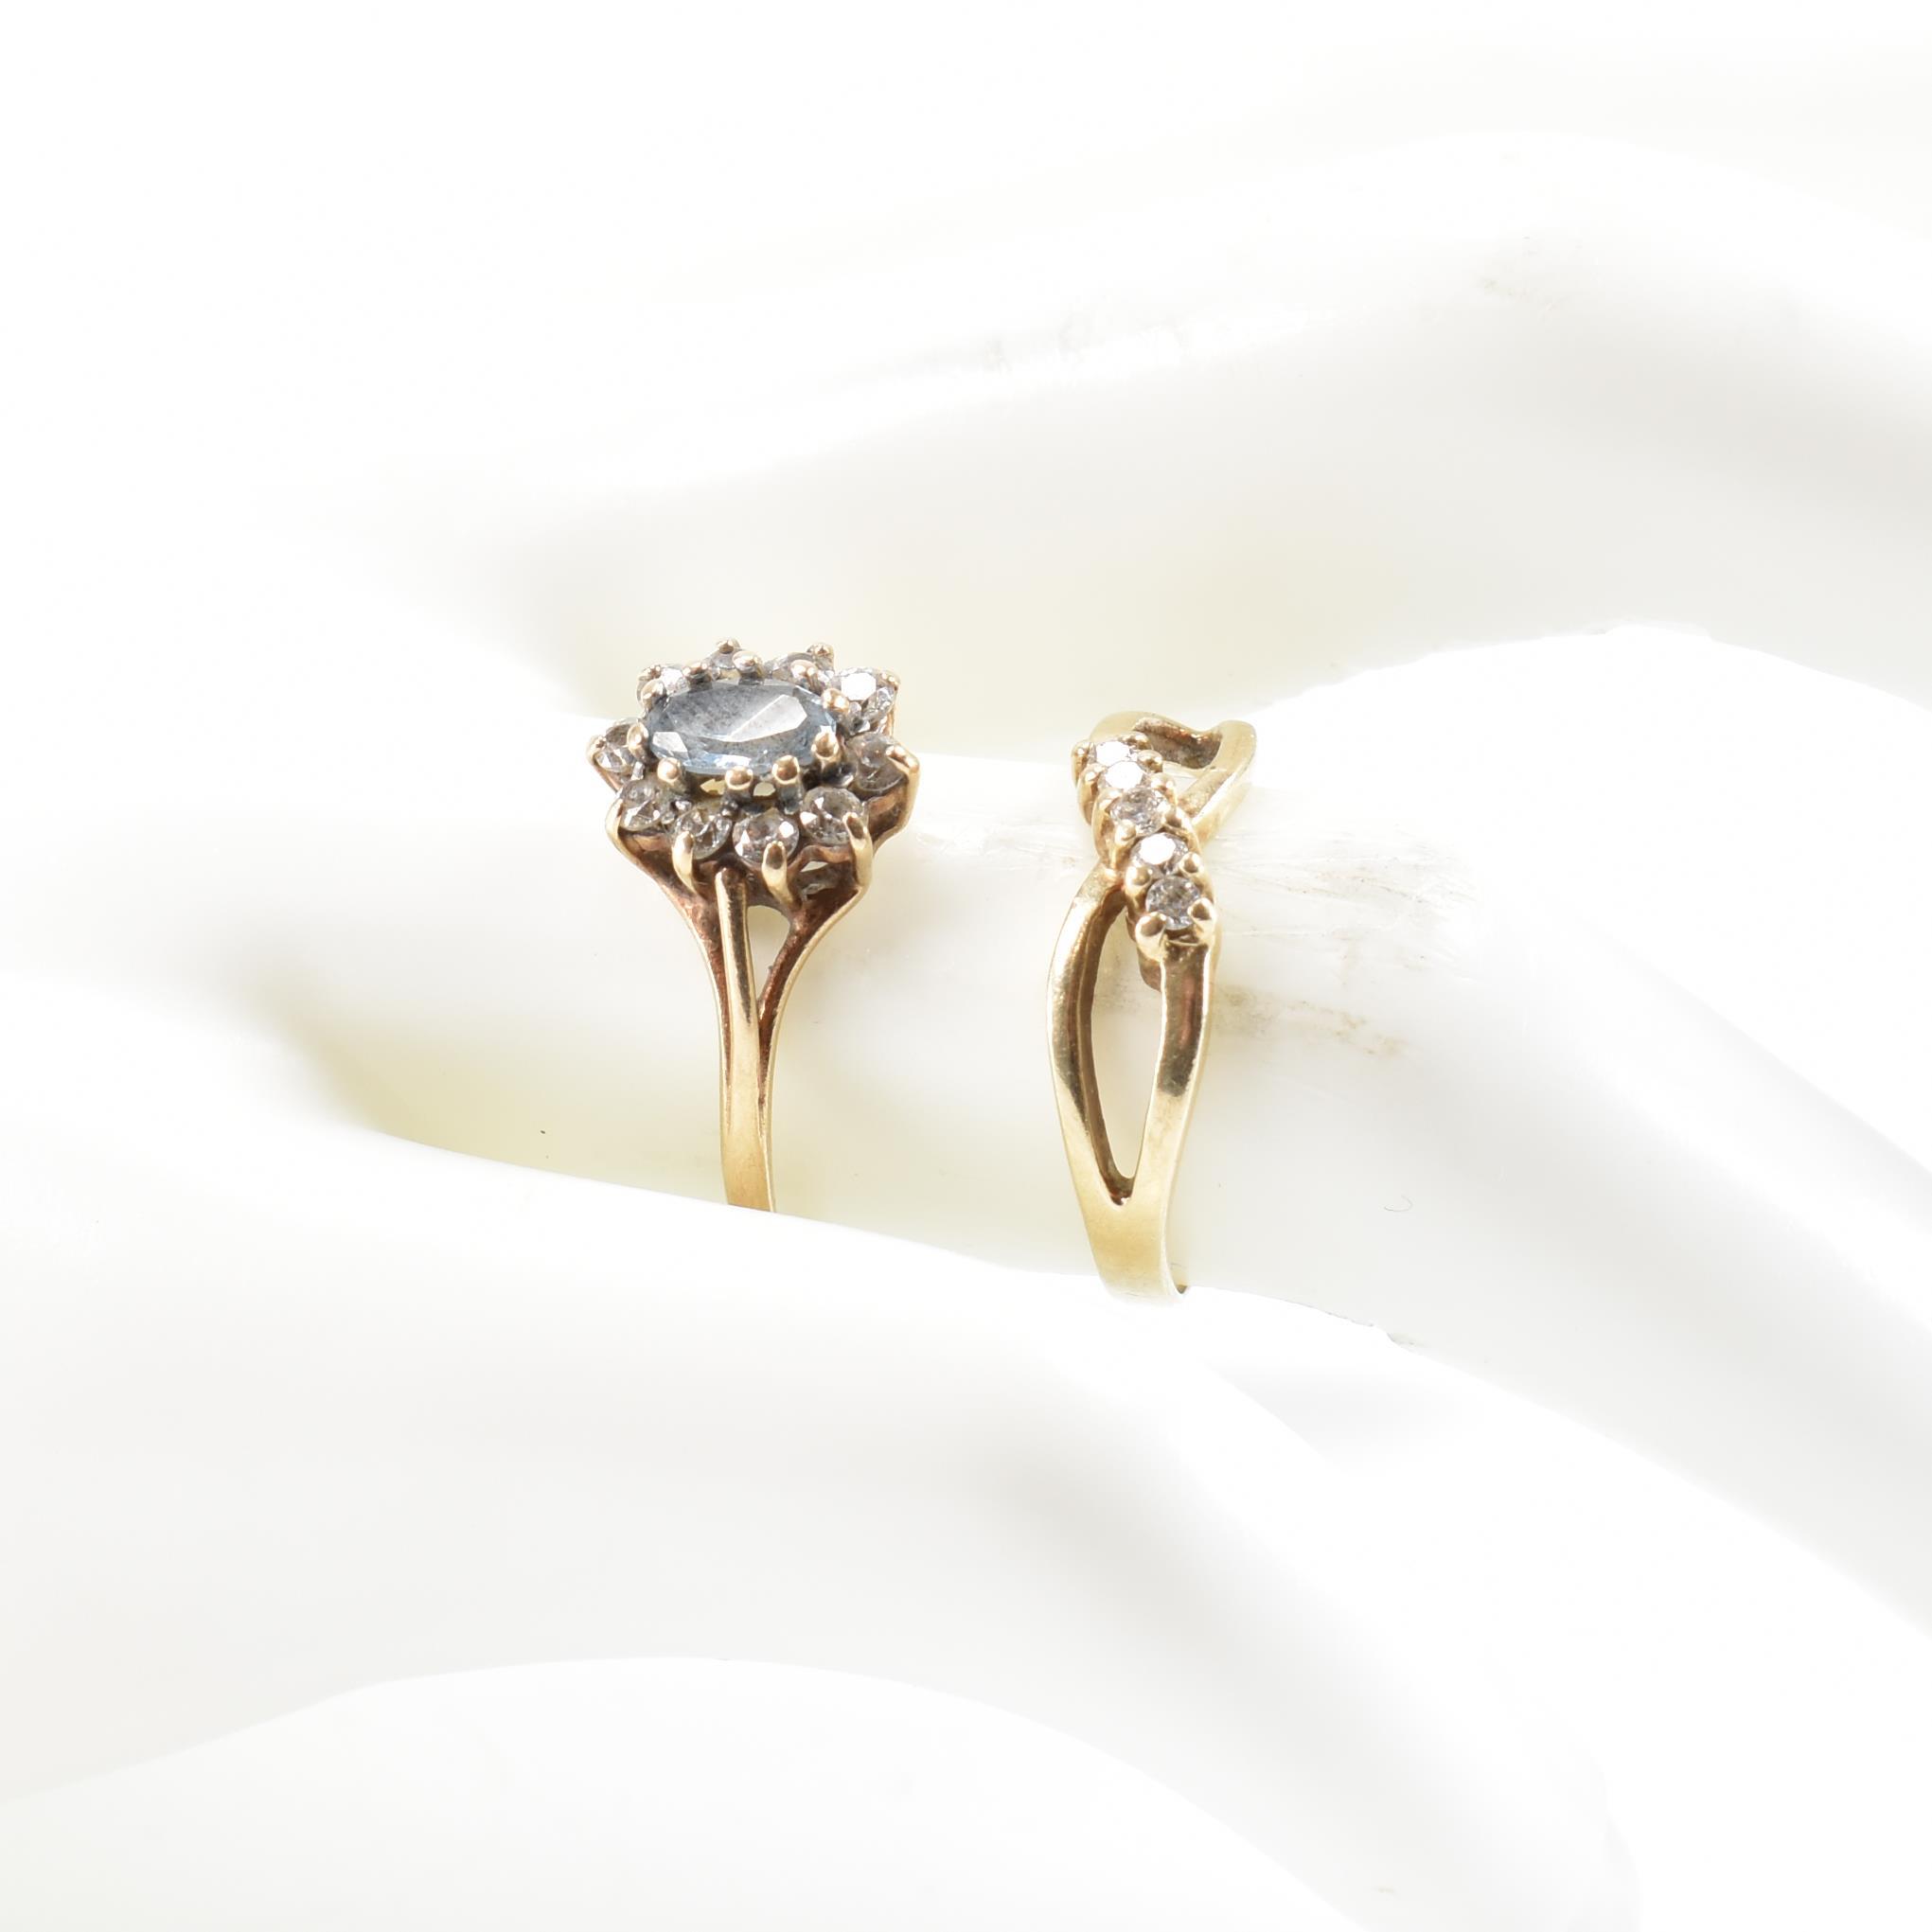 TWO HALLMARKED 9CT GOLD & STONE SET RINGS - Image 11 of 11